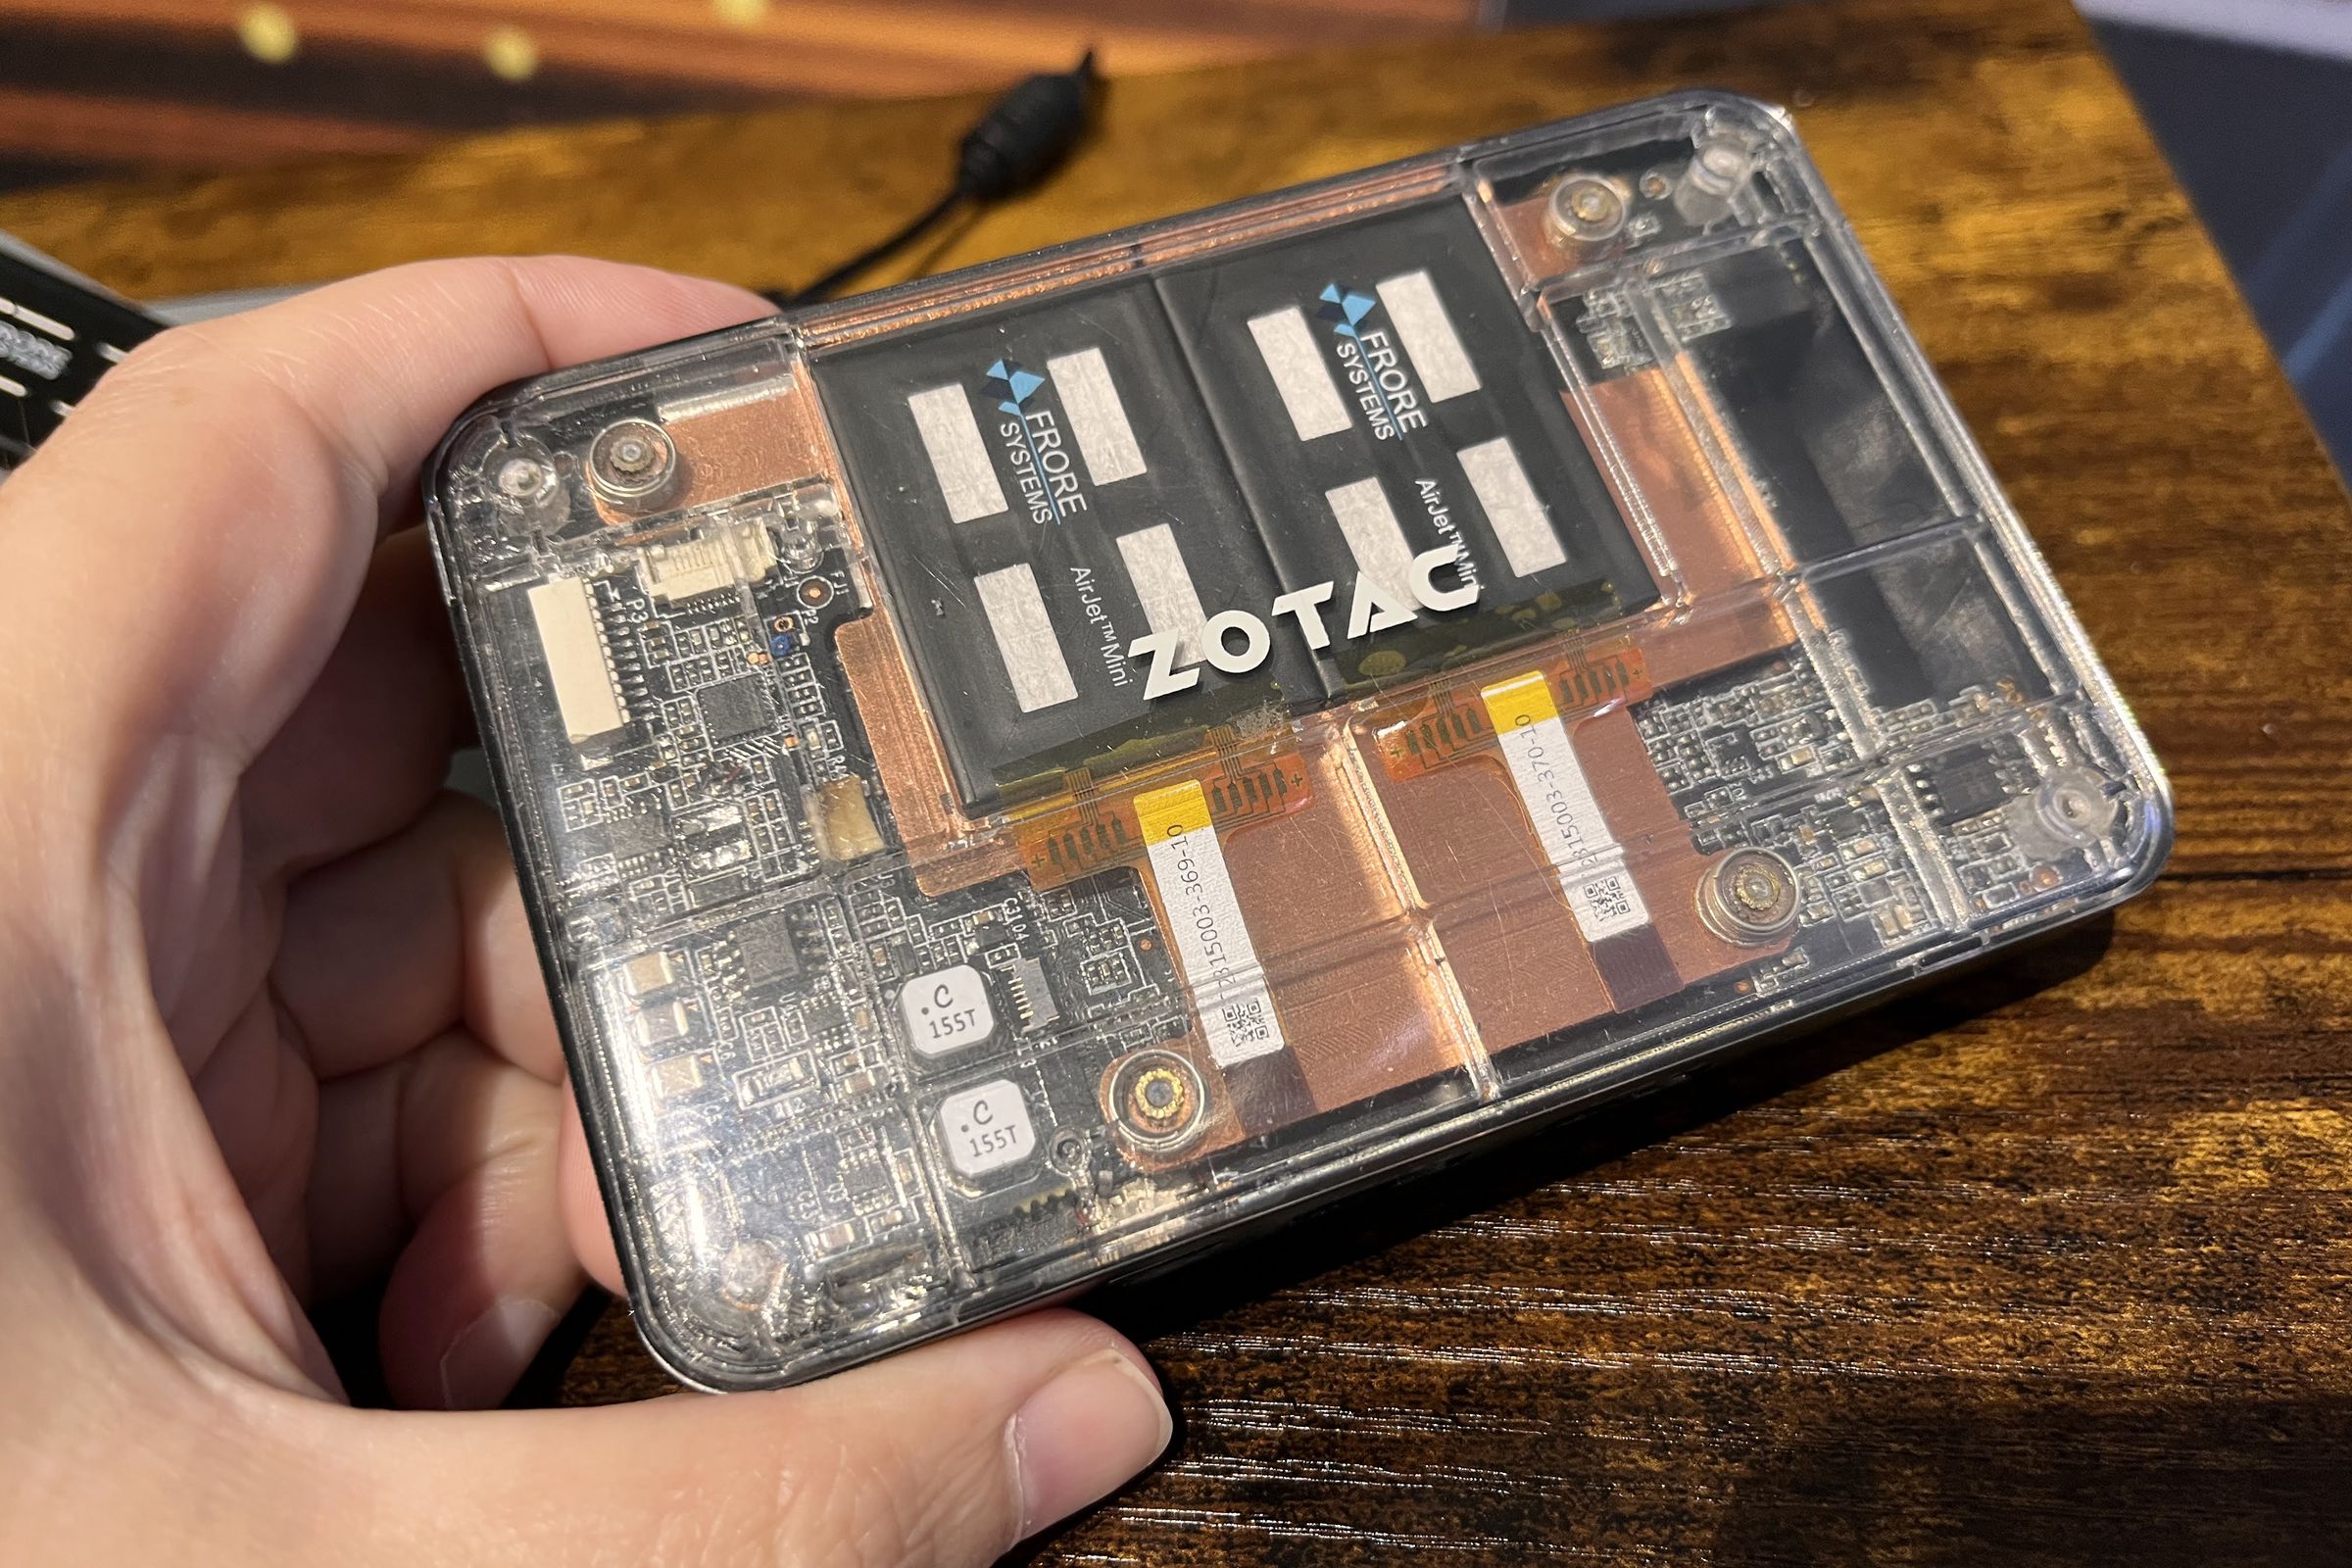 A visual sample of the Zotac Zbox Pico with AirJet — full disclosure that the flex cables aren’t actually connected.